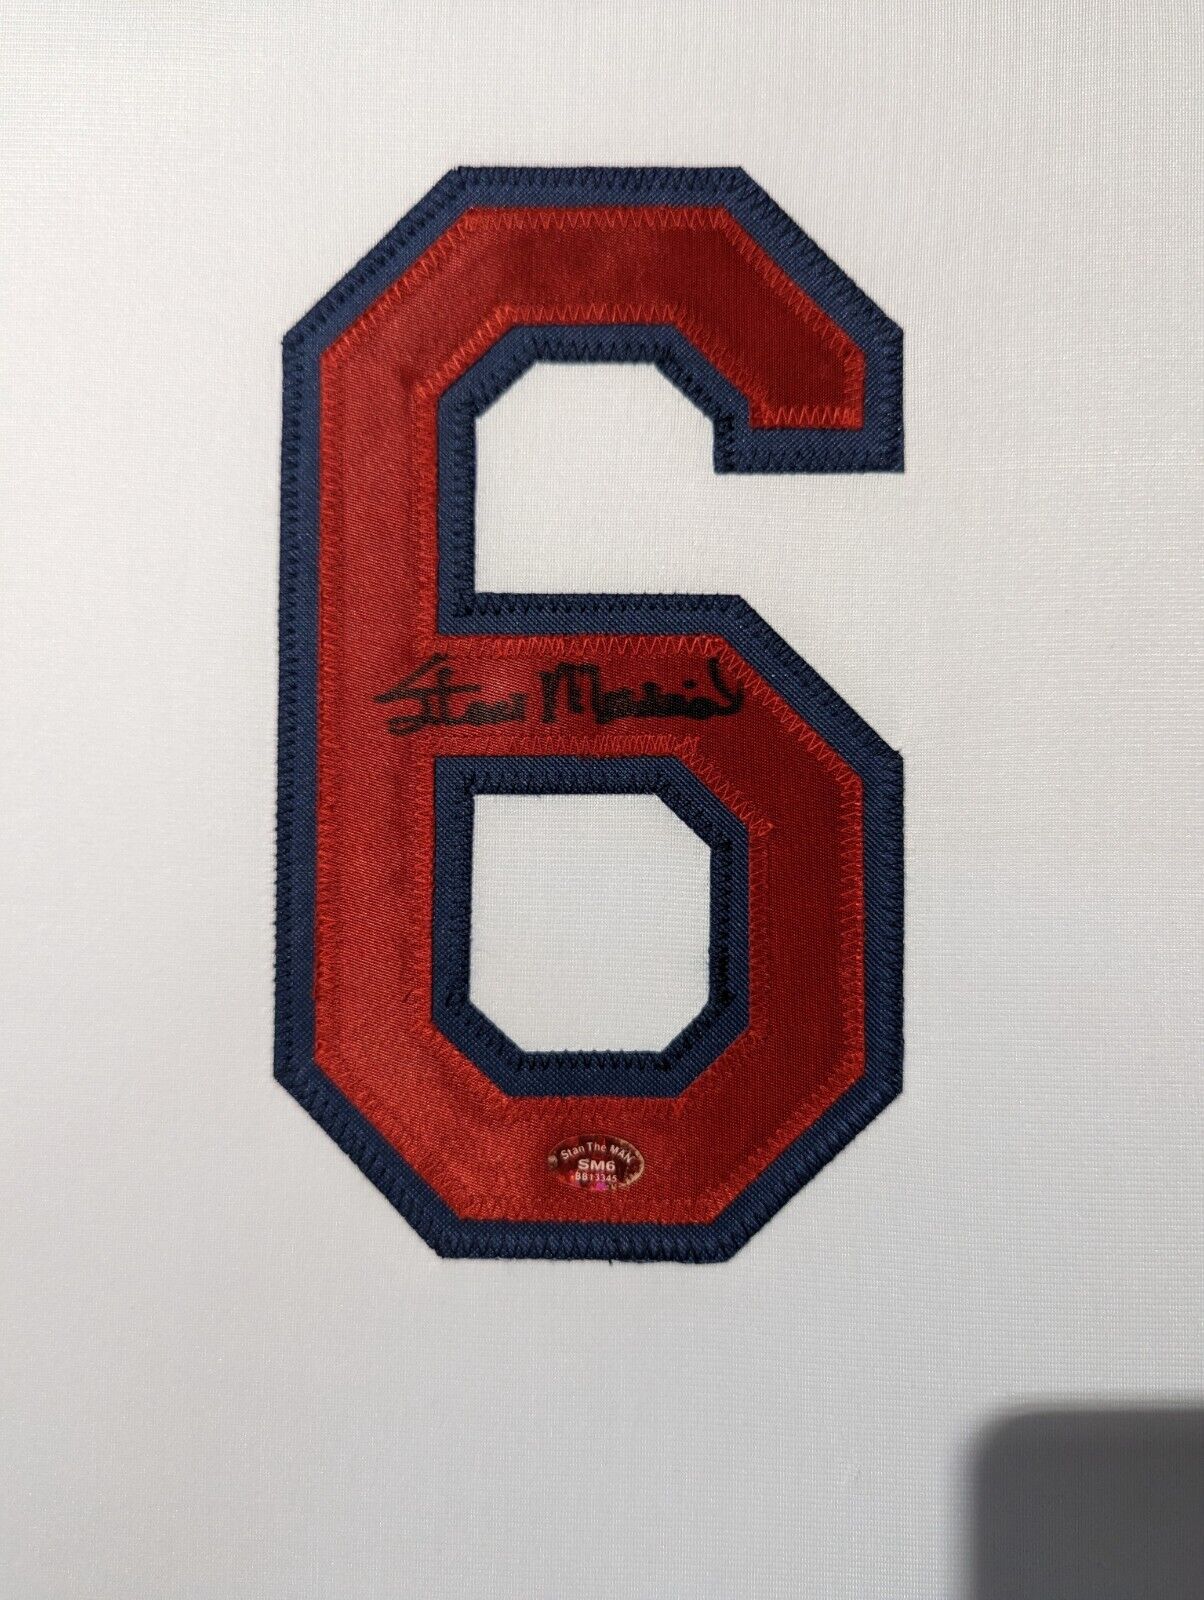 Stan Musial Autographed Signed St. Louis Cardinals Jersey With JSA COA